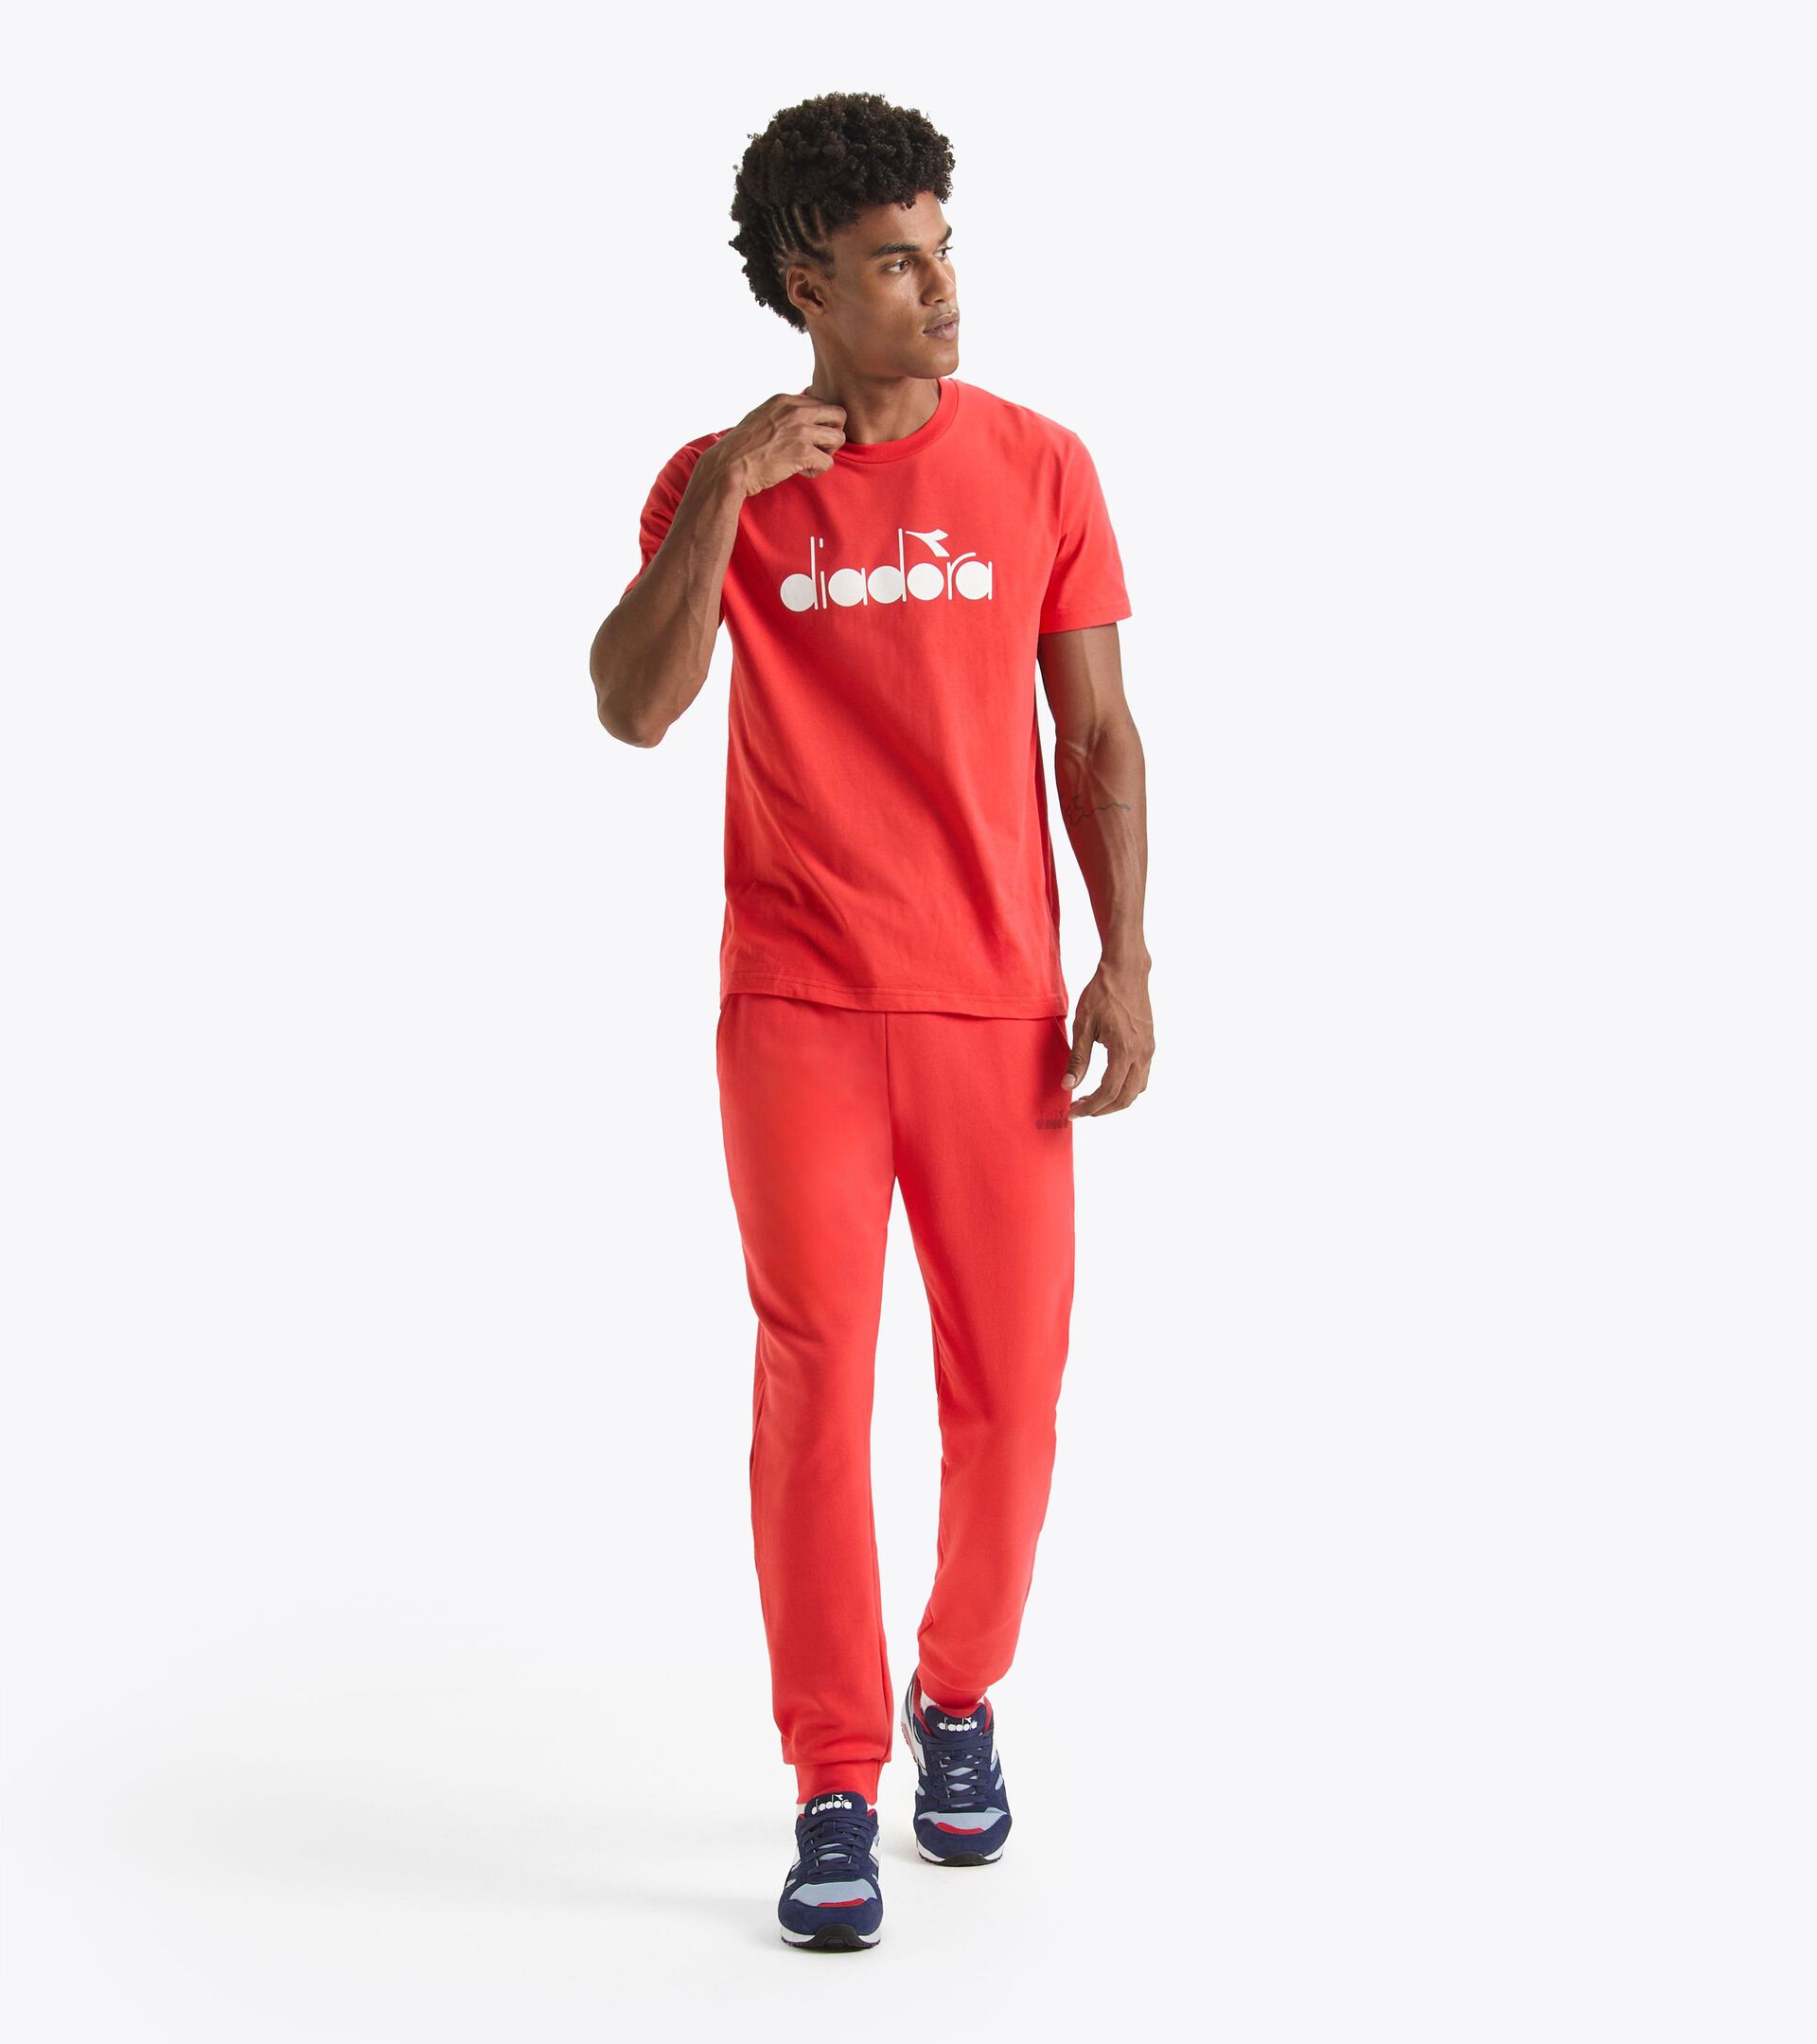 Sporty sweatpants - Made in Italy - Gender Neutral PANTS LOGO BITTERSWEET RED - Diadora